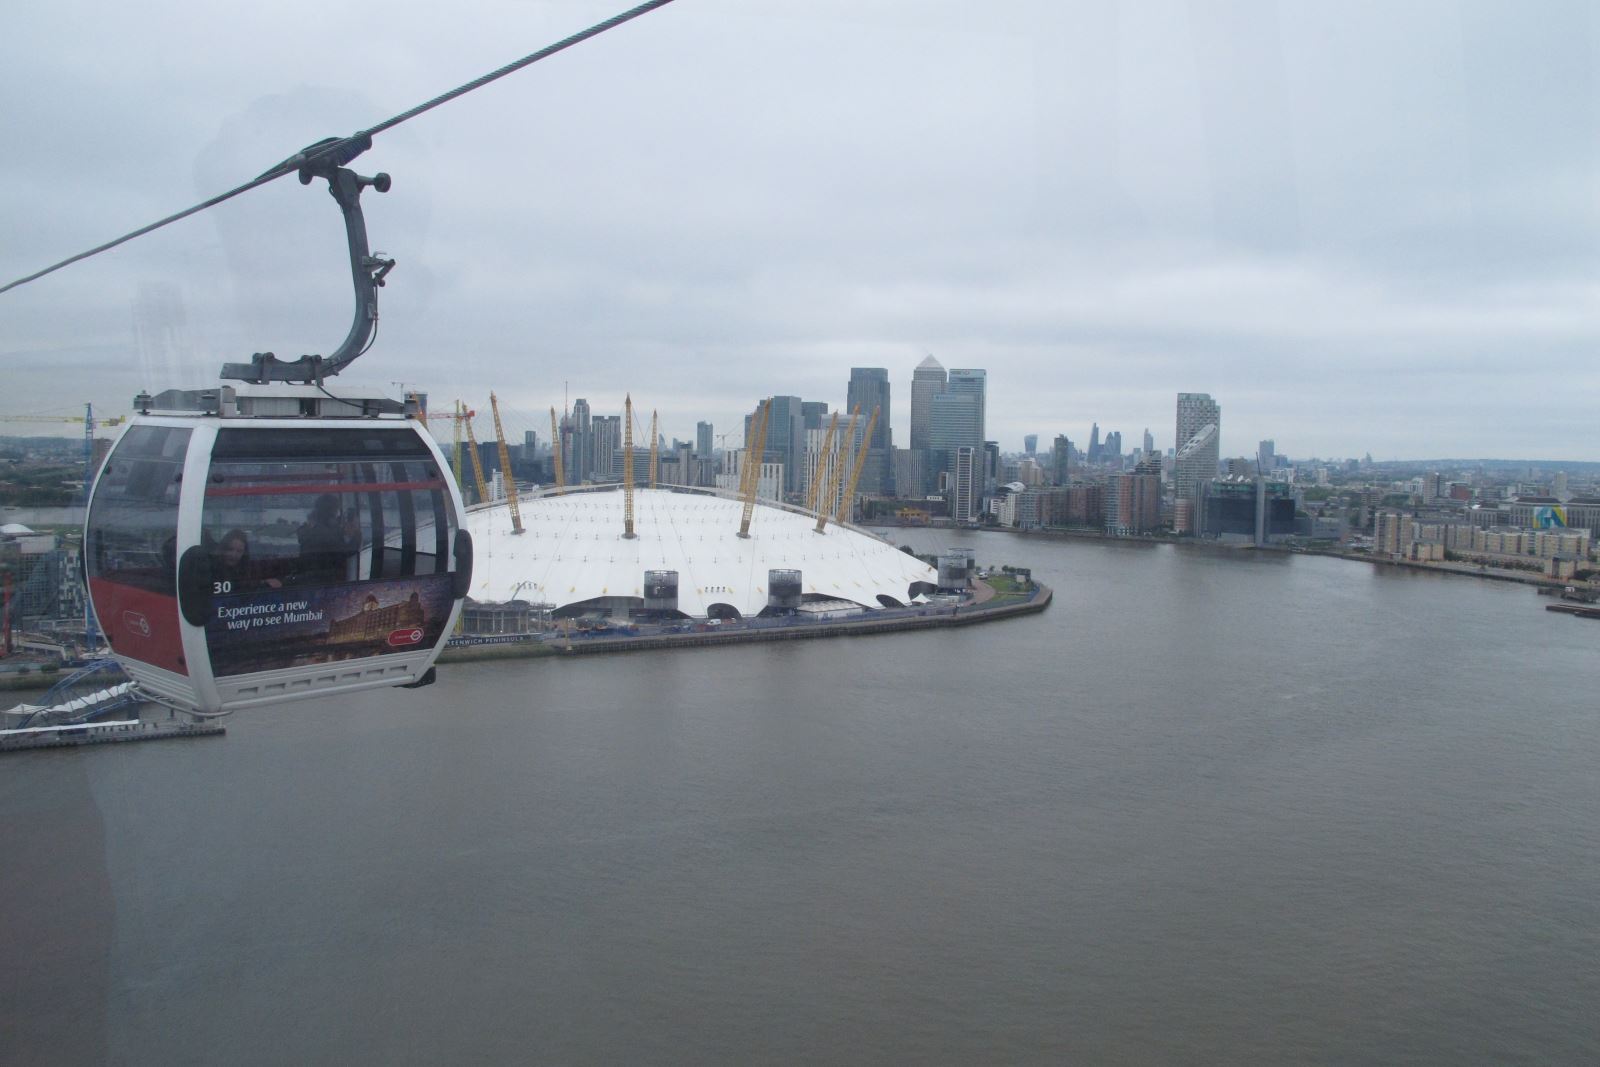 Emirates air line over London